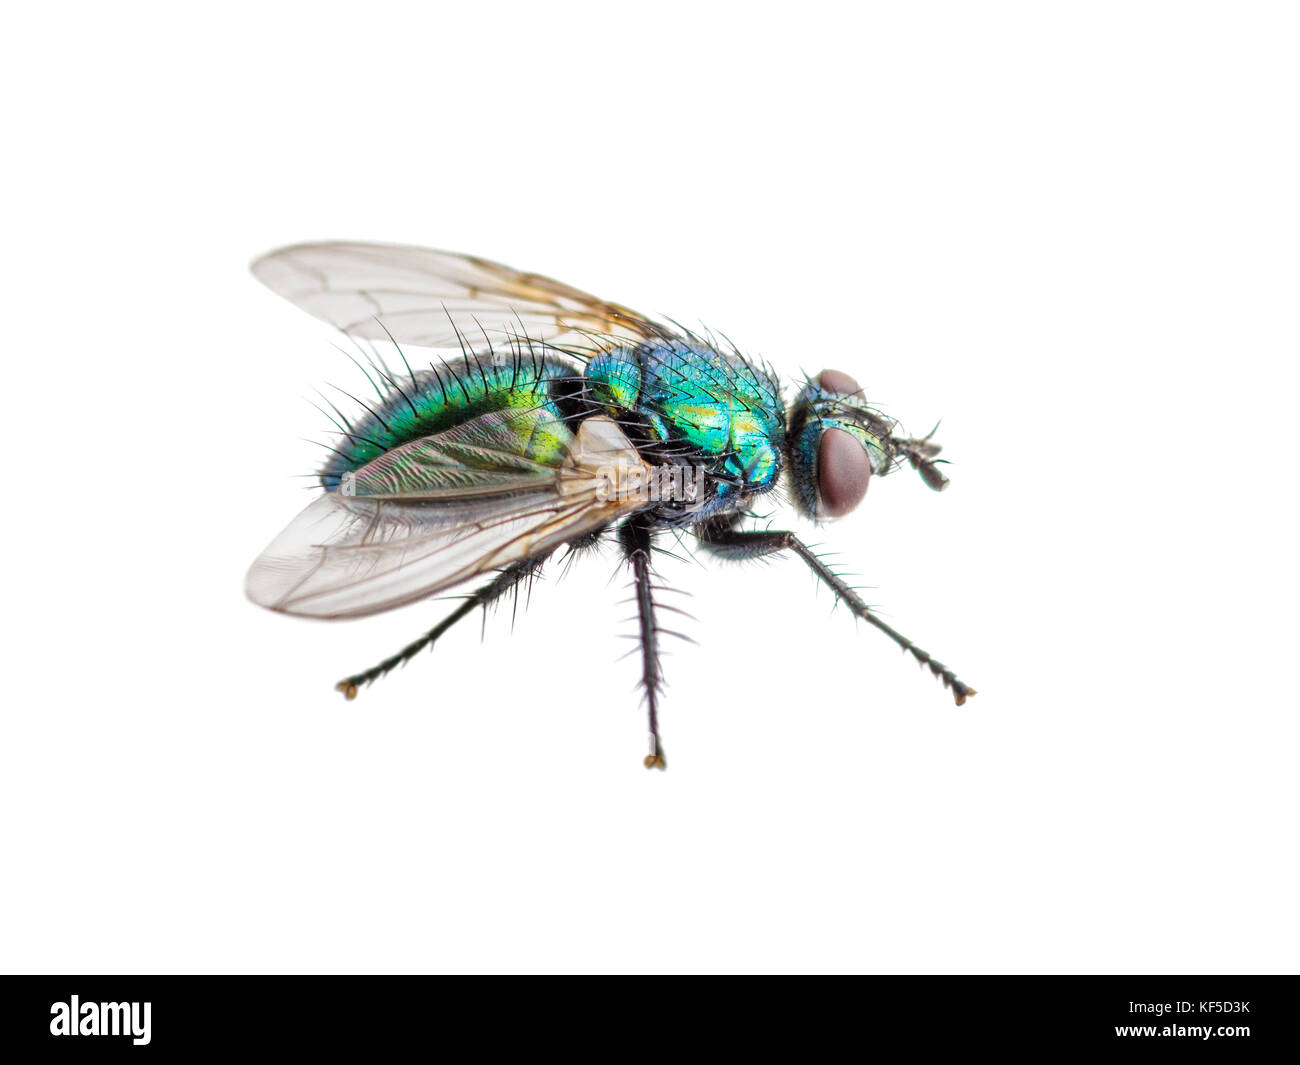 Drosophila Fly Diptera Insect Isolated on White Stock Photo